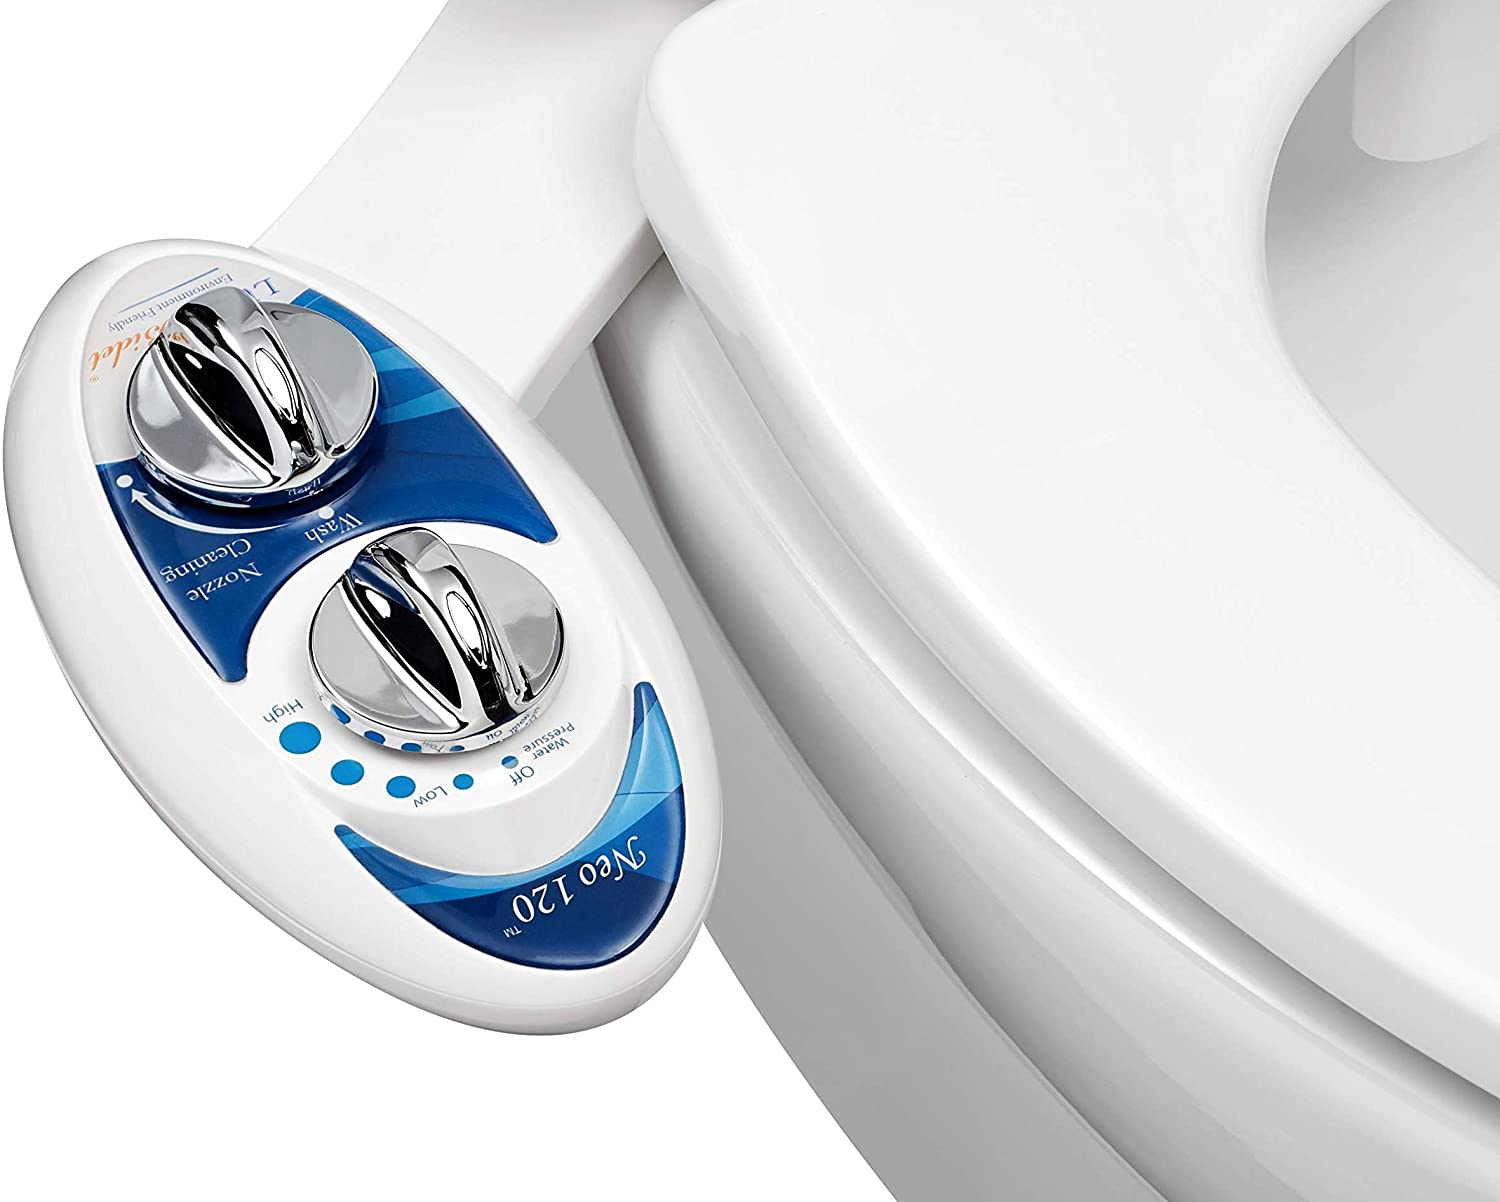 LUXE Bidet Neo 120 – Self Cleaning Nozzle – Fresh Water Non-Electric Mechanical Bidet Toilet Attachment (blue and white)